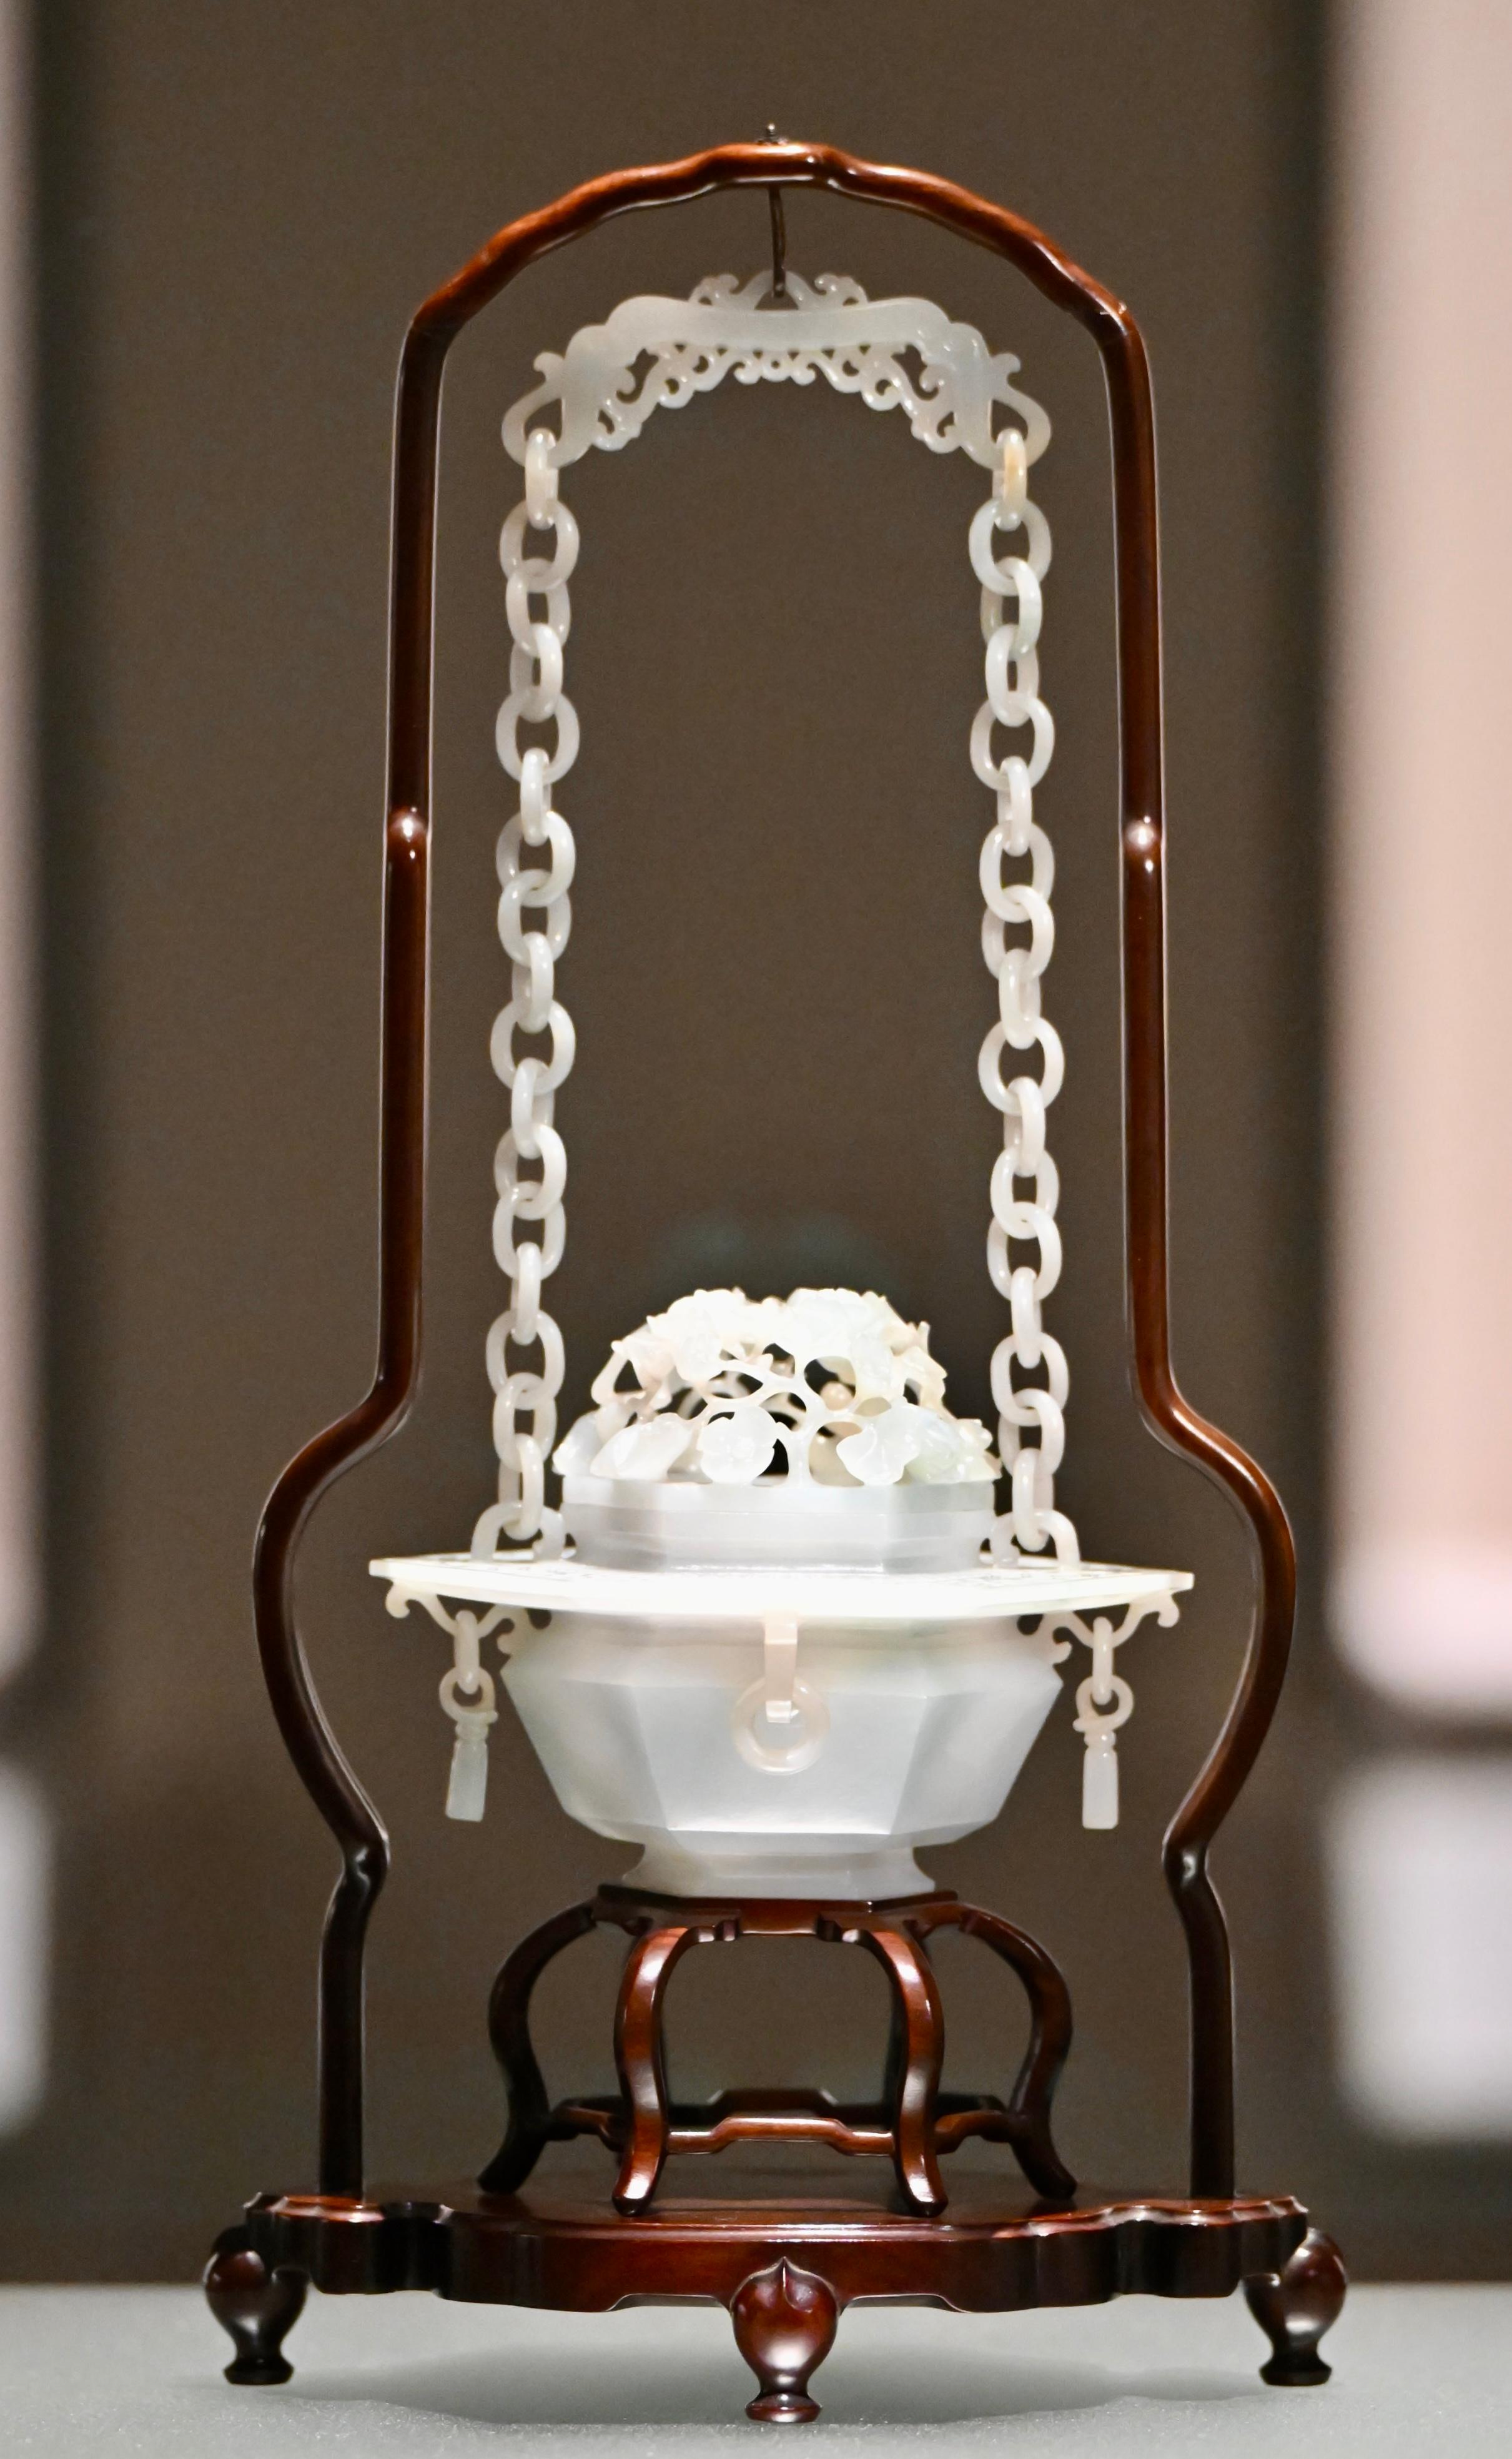 The opening ceremony of the "The Hong Kong Jockey Club Series: Fragrance of Time - In Search of Chinese Art of Scent" exhibition was held today (June 27) at the Hong Kong Museum of Art (HKMoA). Photo shows a hanging censer carved with an openwork floral design and six loop handles from the Qing dynasty of the HKMoA collection, exemplifying an exquisite jade-carving style.